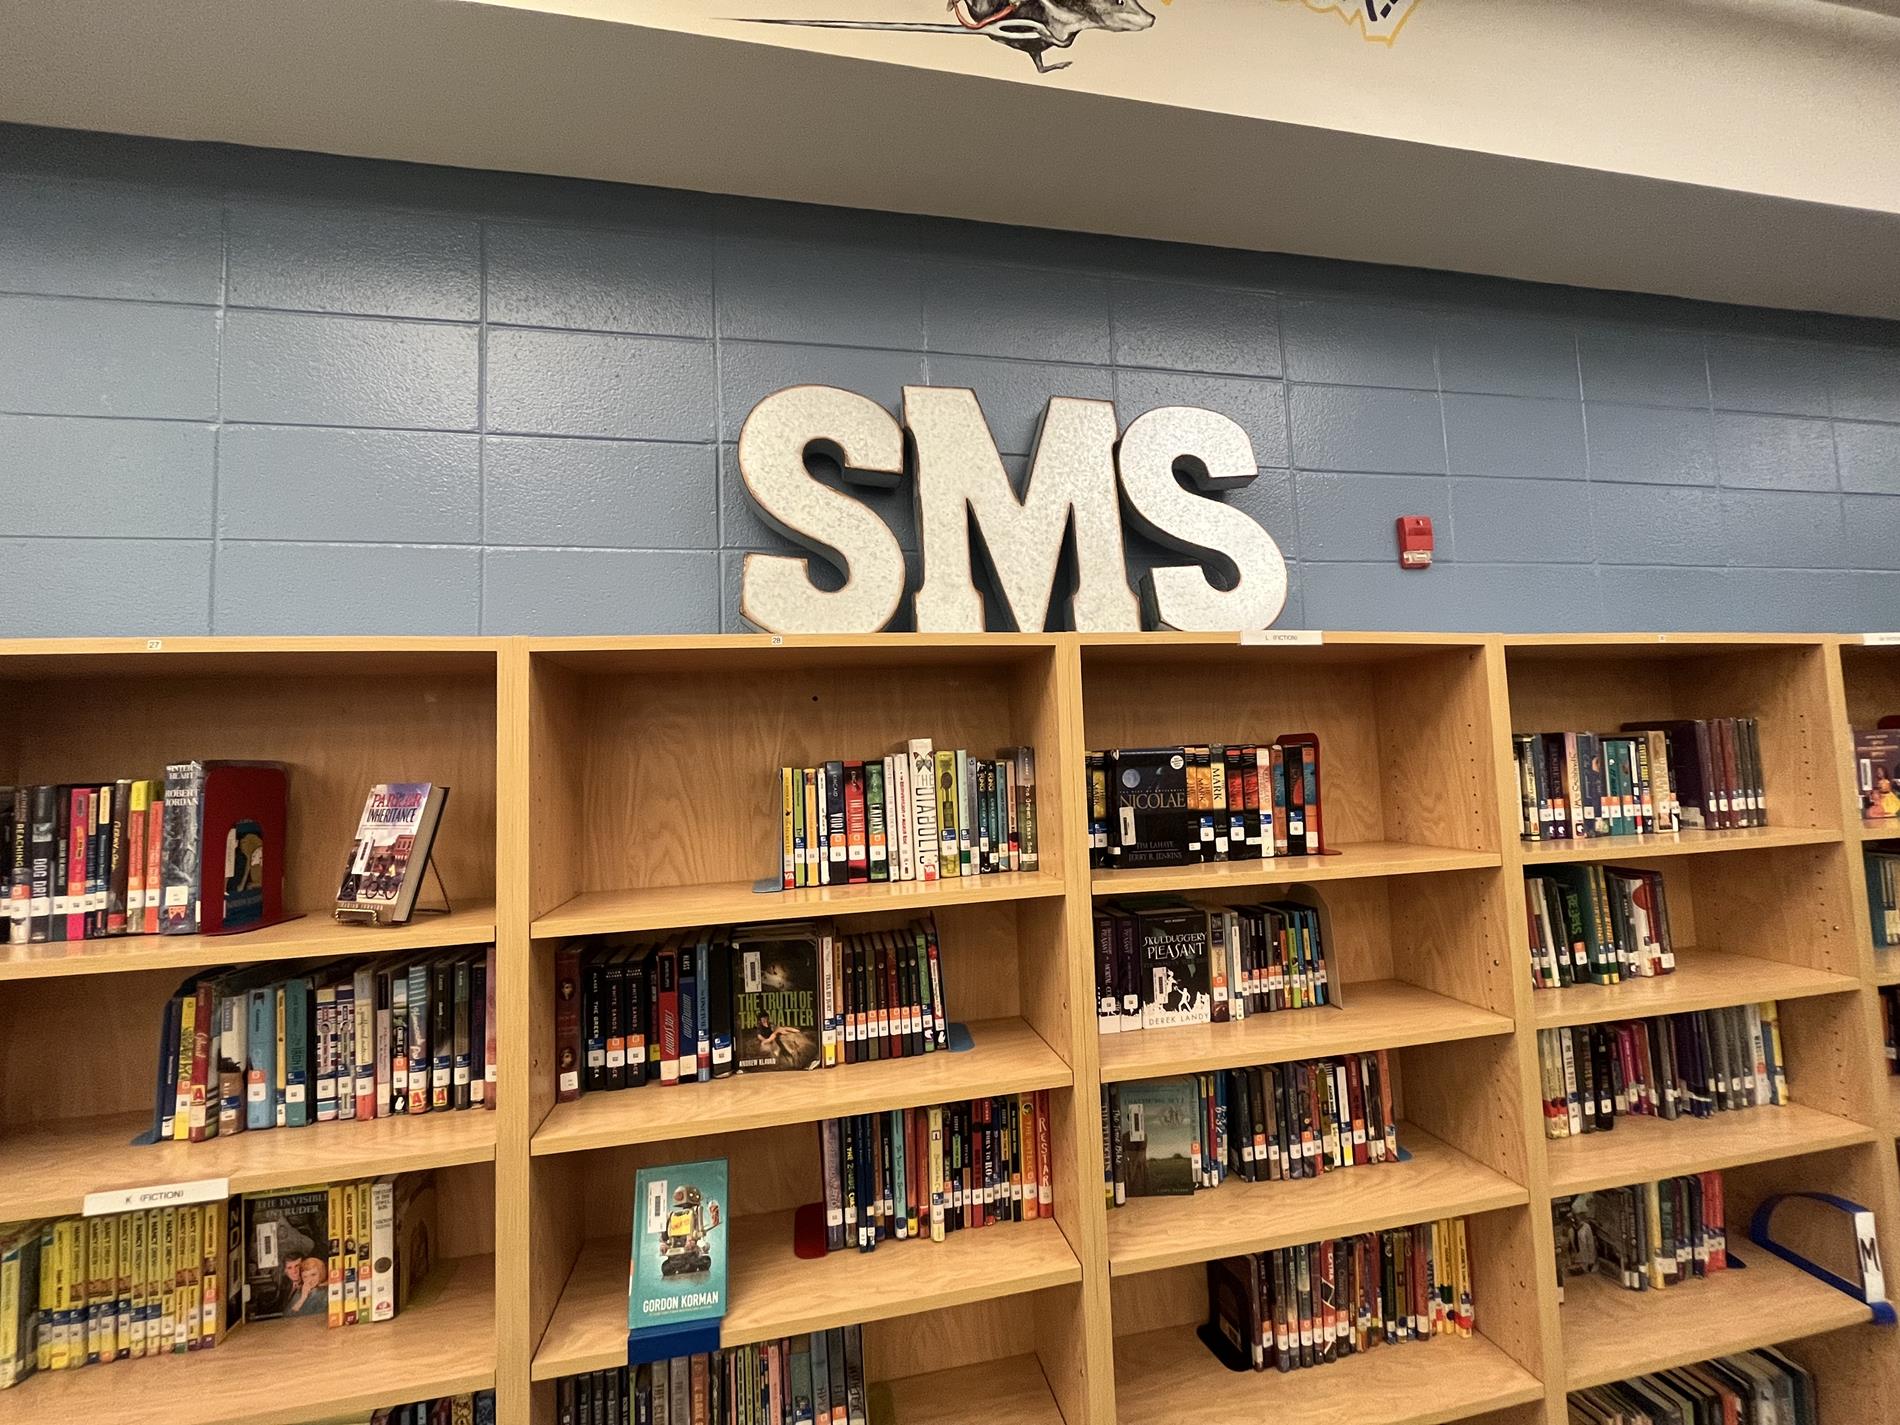 SMS letters on display